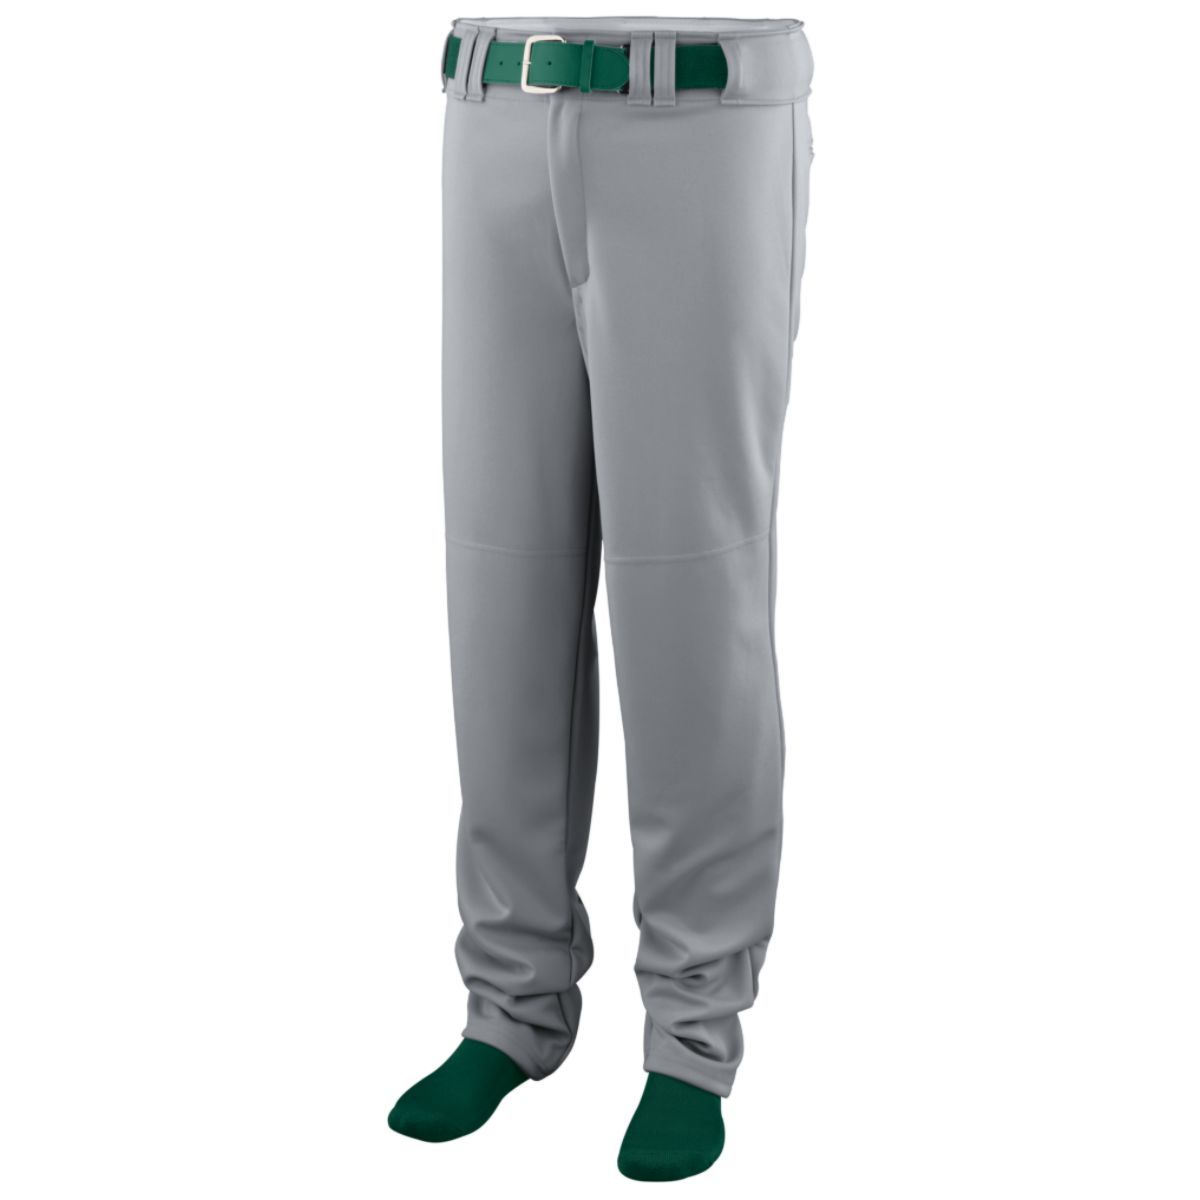 Augusta Sportswear Youth Series Baseball/Softball Pant in Silver Grey  -Part of the Youth, Youth-Pants, Pants, Augusta-Products, Baseball, All-Sports, All-Sports-1 product lines at KanaleyCreations.com